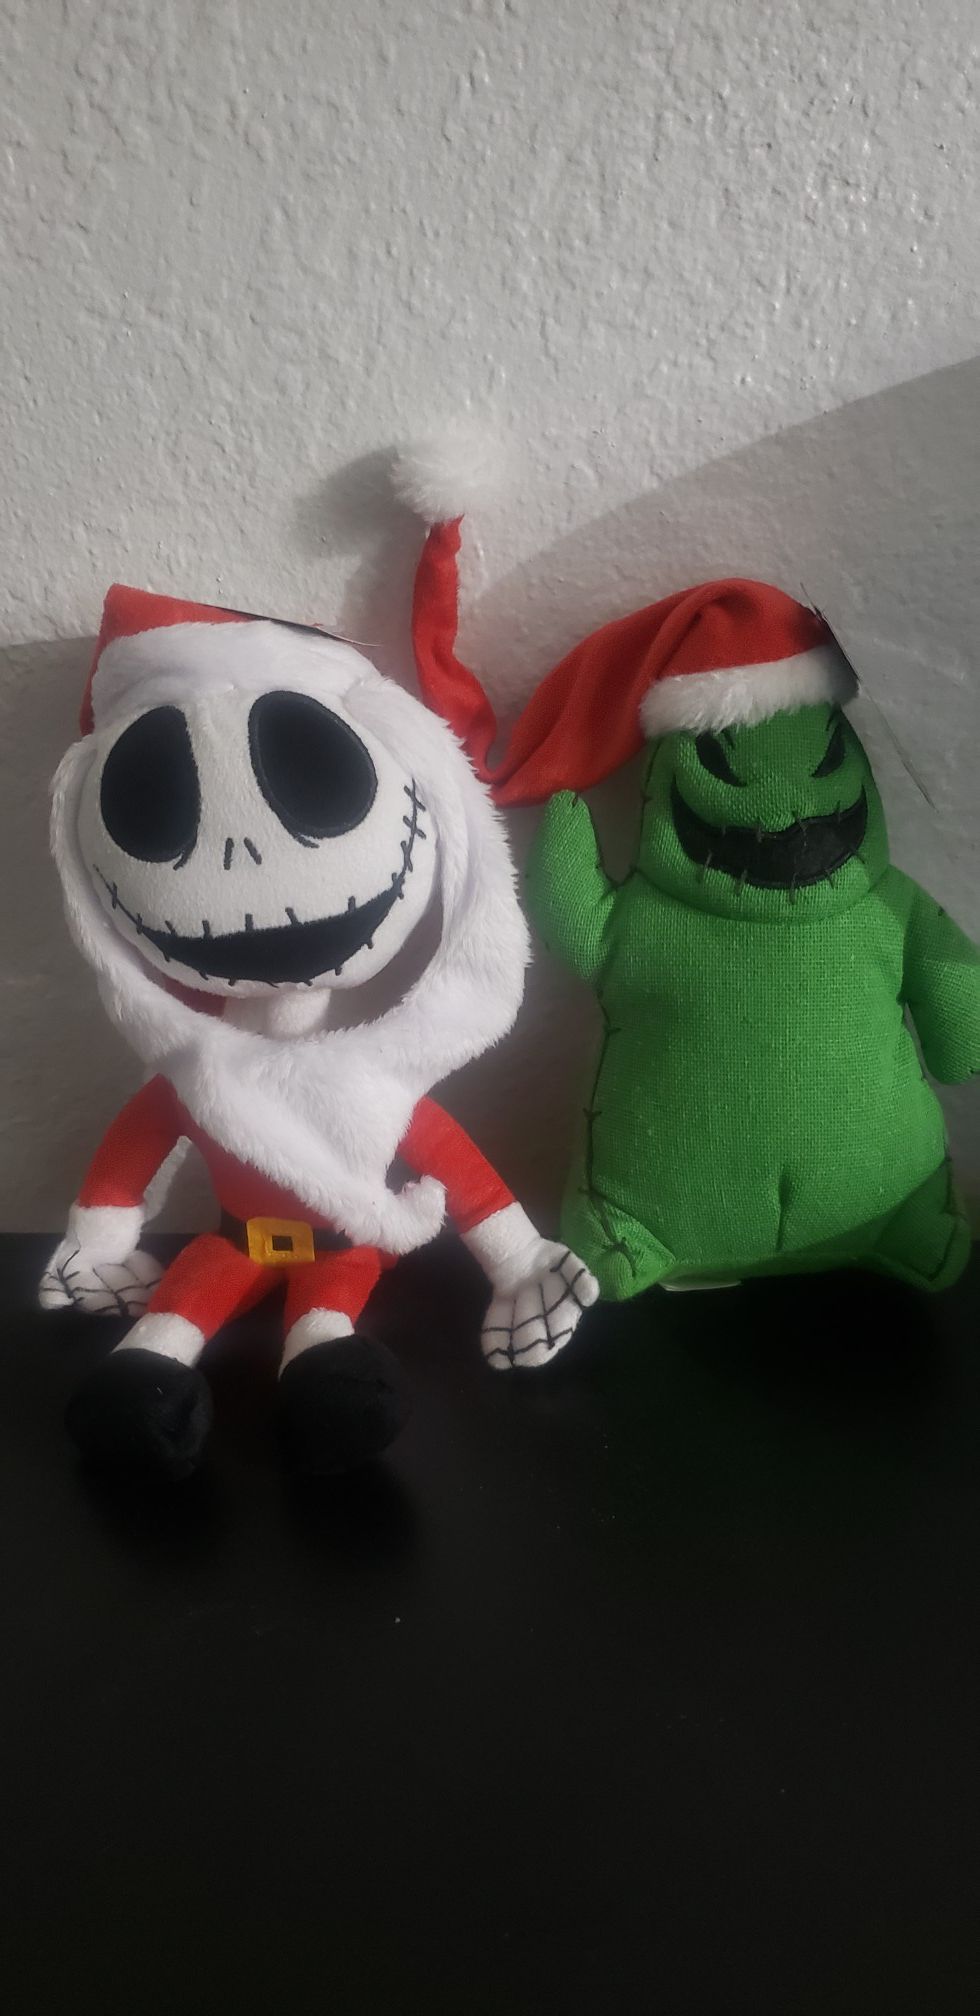 The Nightmare Before Christmas Set of 2- Jack Skellington And Oogie Boogie Plush